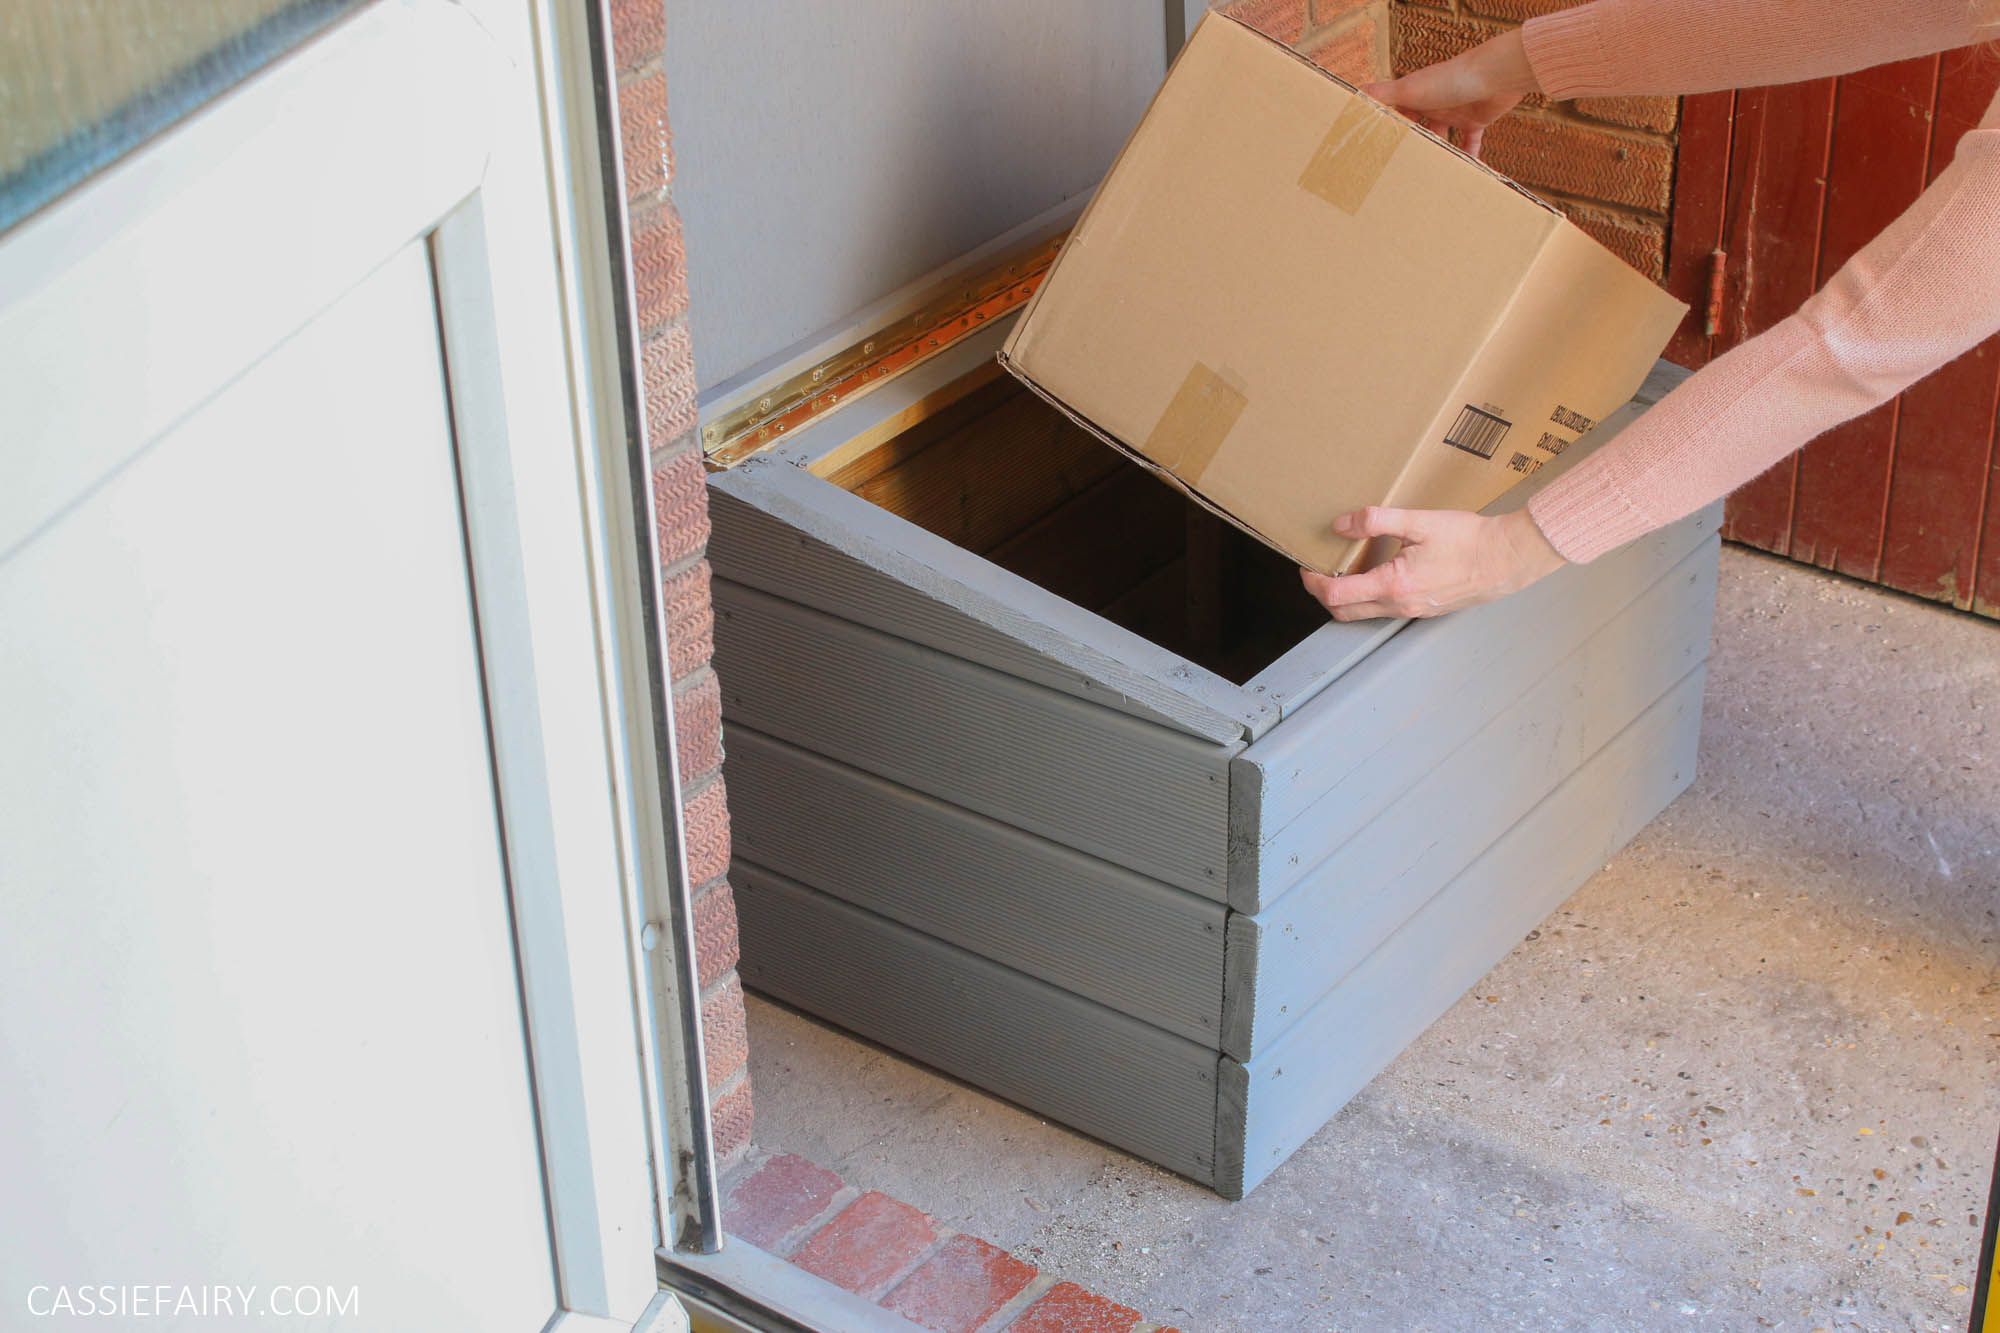 DIY Guide to build a delivery box using offcuts of wood